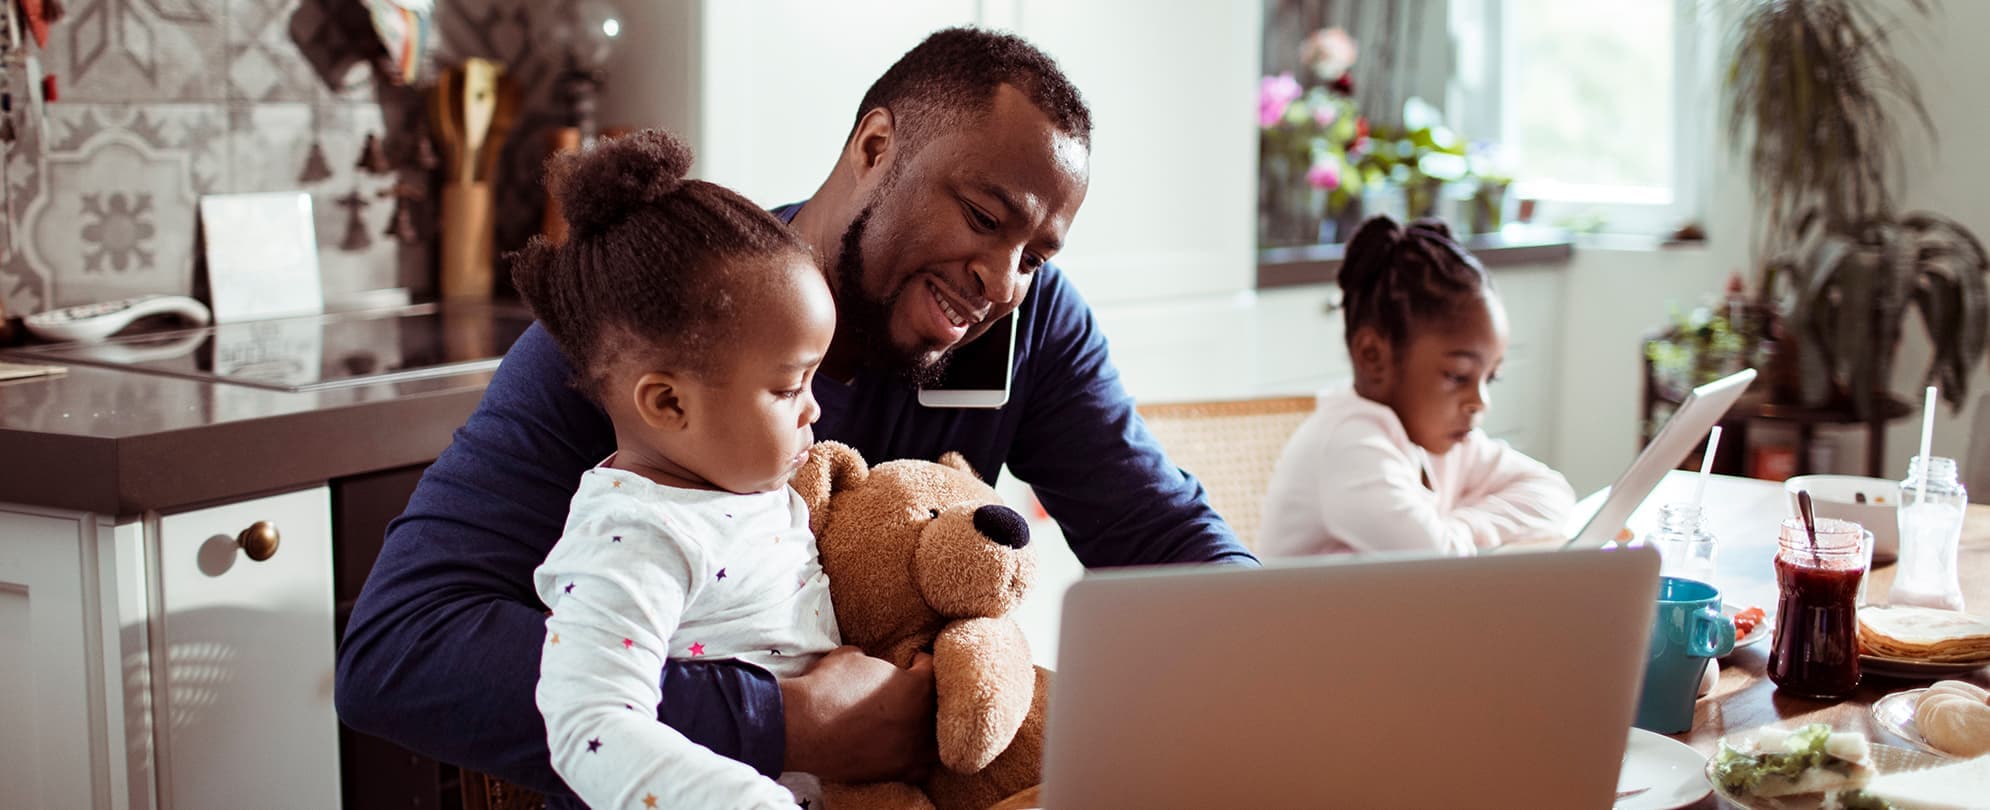 Man with his two daughters at the kitchen table, man is holding one of his daughters and her teddy bear as he talks on the phone and works on his laptop